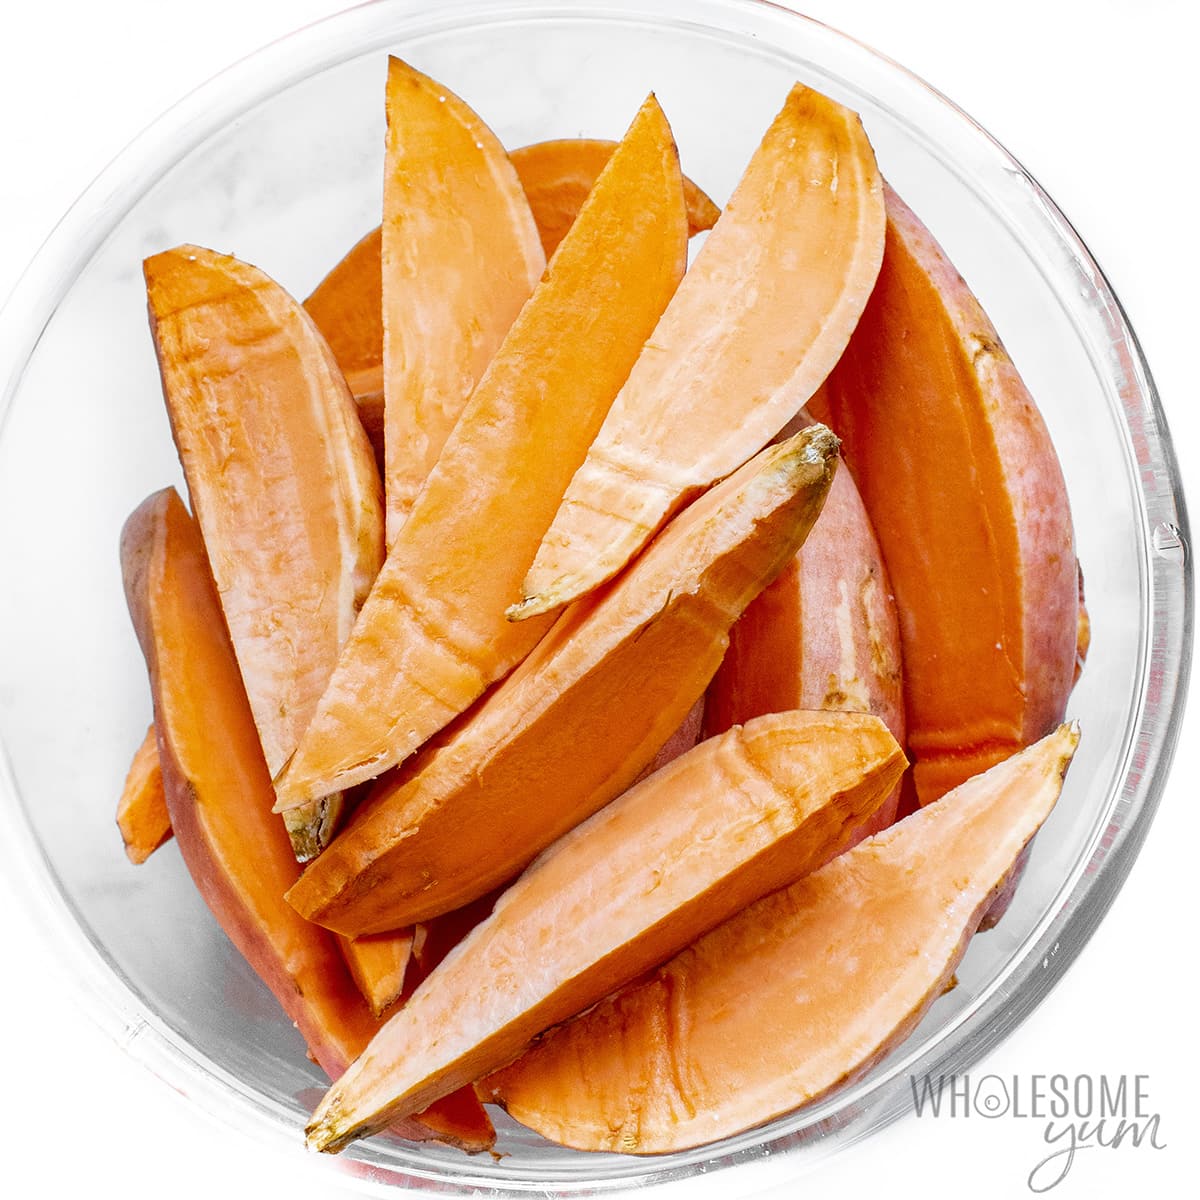 Raw sweet potato wedges in a bowl.